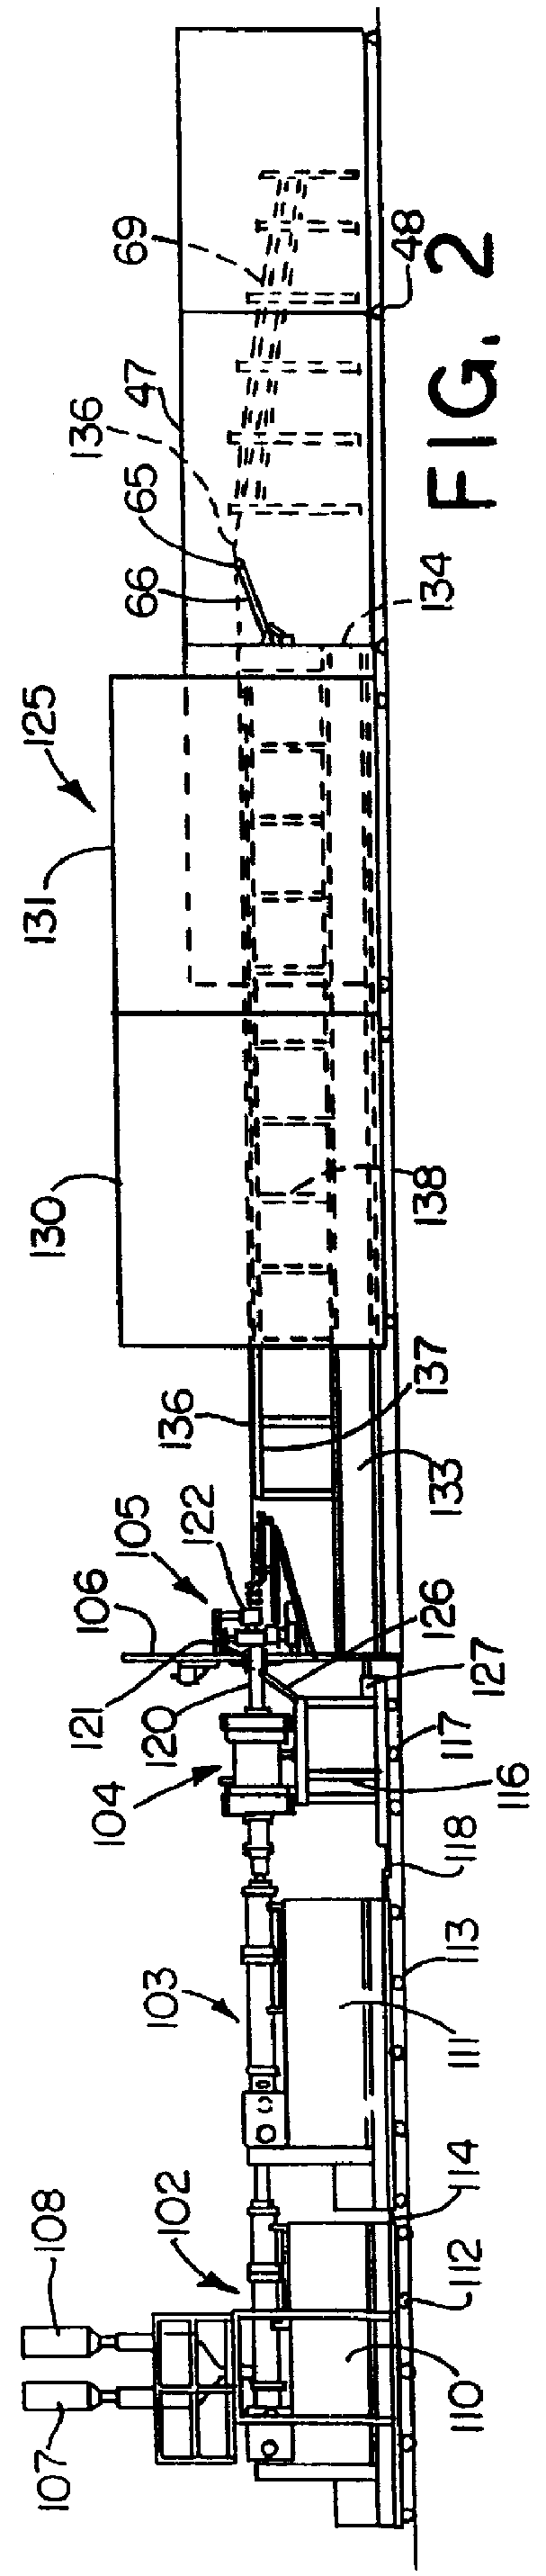 Sealable chamber extrusion apparatus with seal controls